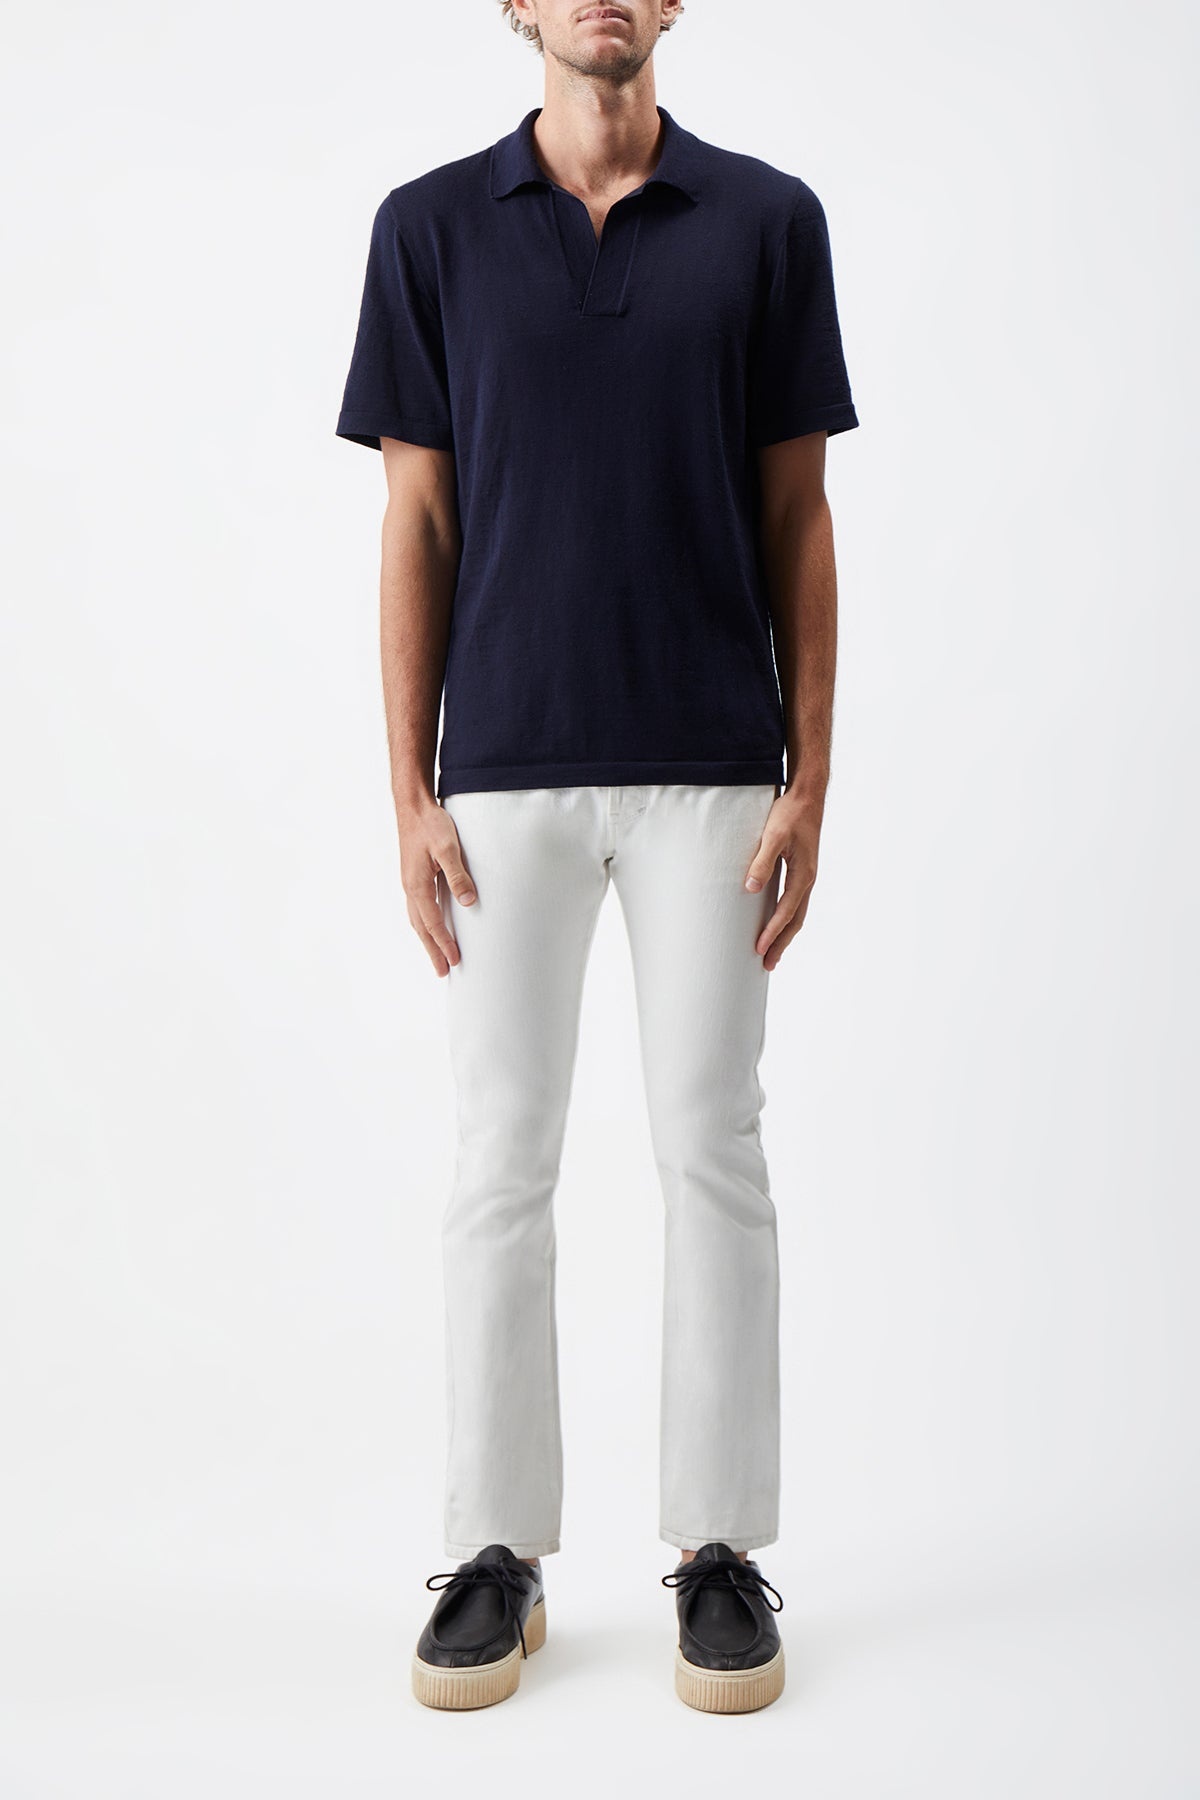 Stendhal Knit Short Sleeve Polo in Navy Cashmere - 2